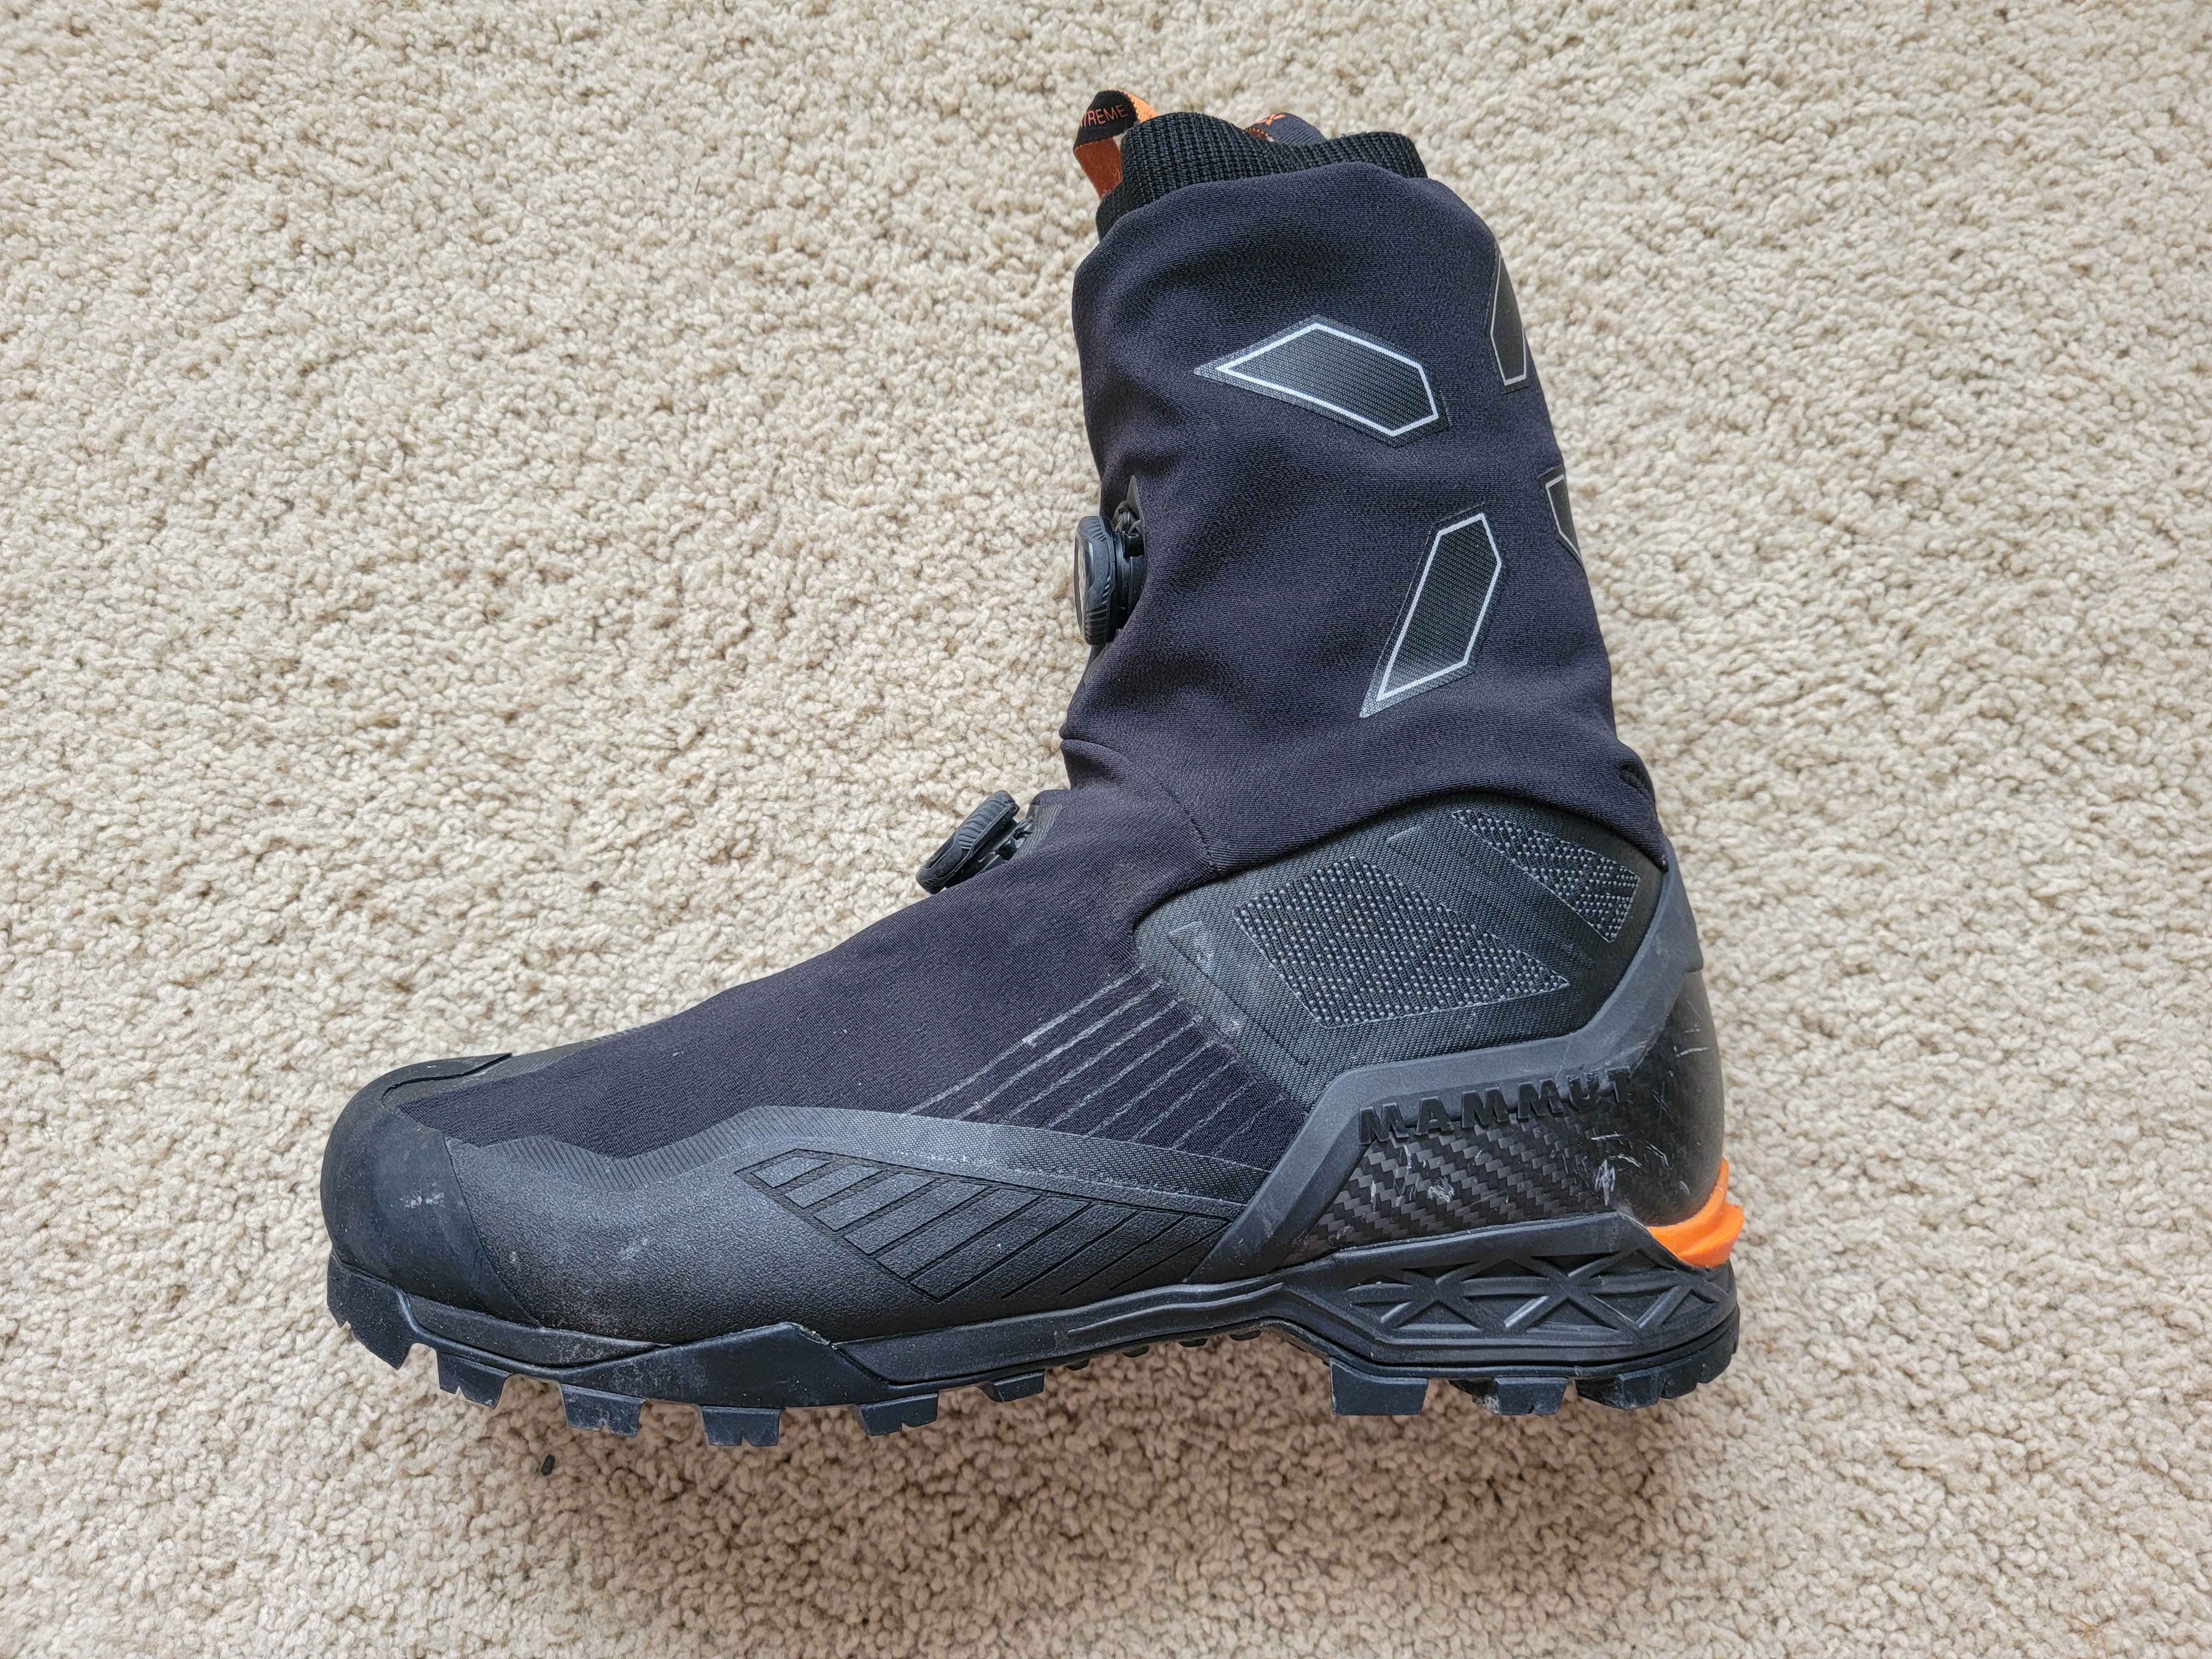 Various mountaineering boots for sale - The Yard Sale